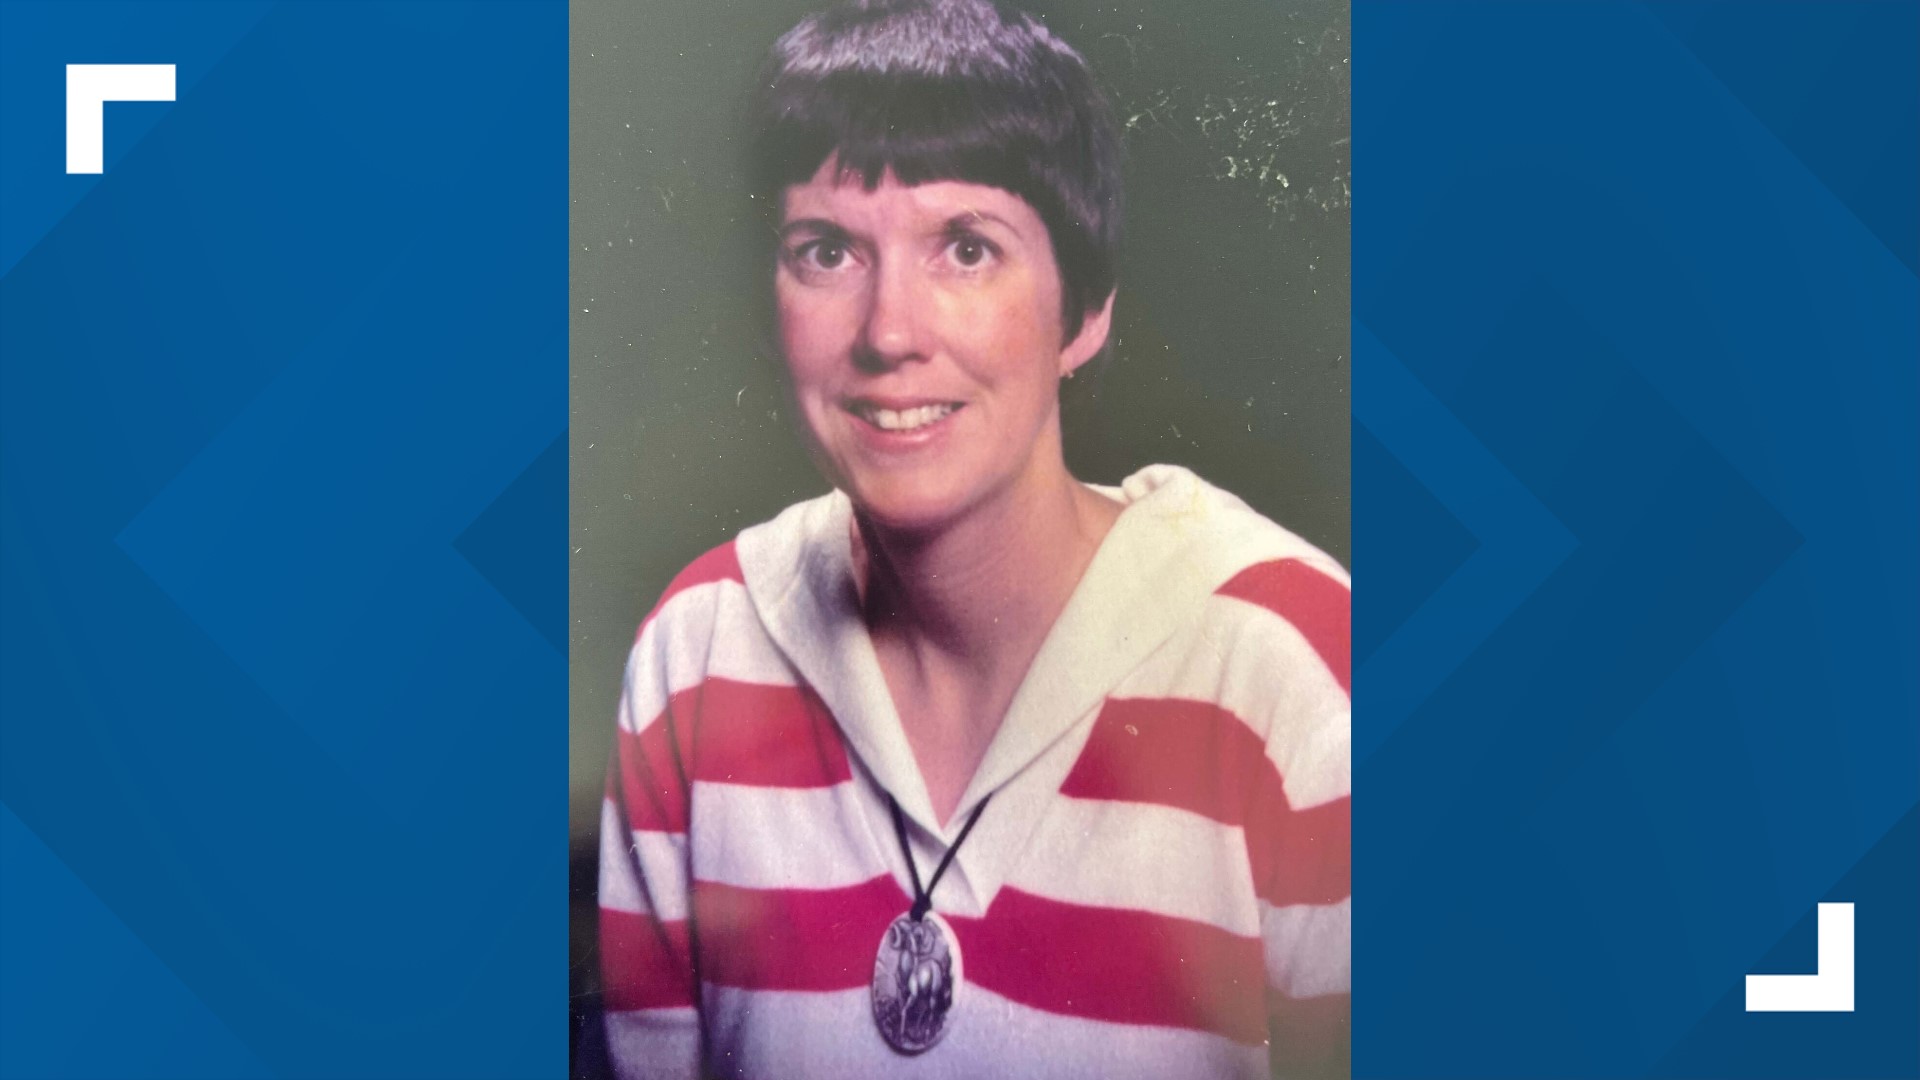 Over the past 28 years, investigators from multiple law enforcement agencies have tried to find out what happened to Windy Point Jane Doe.